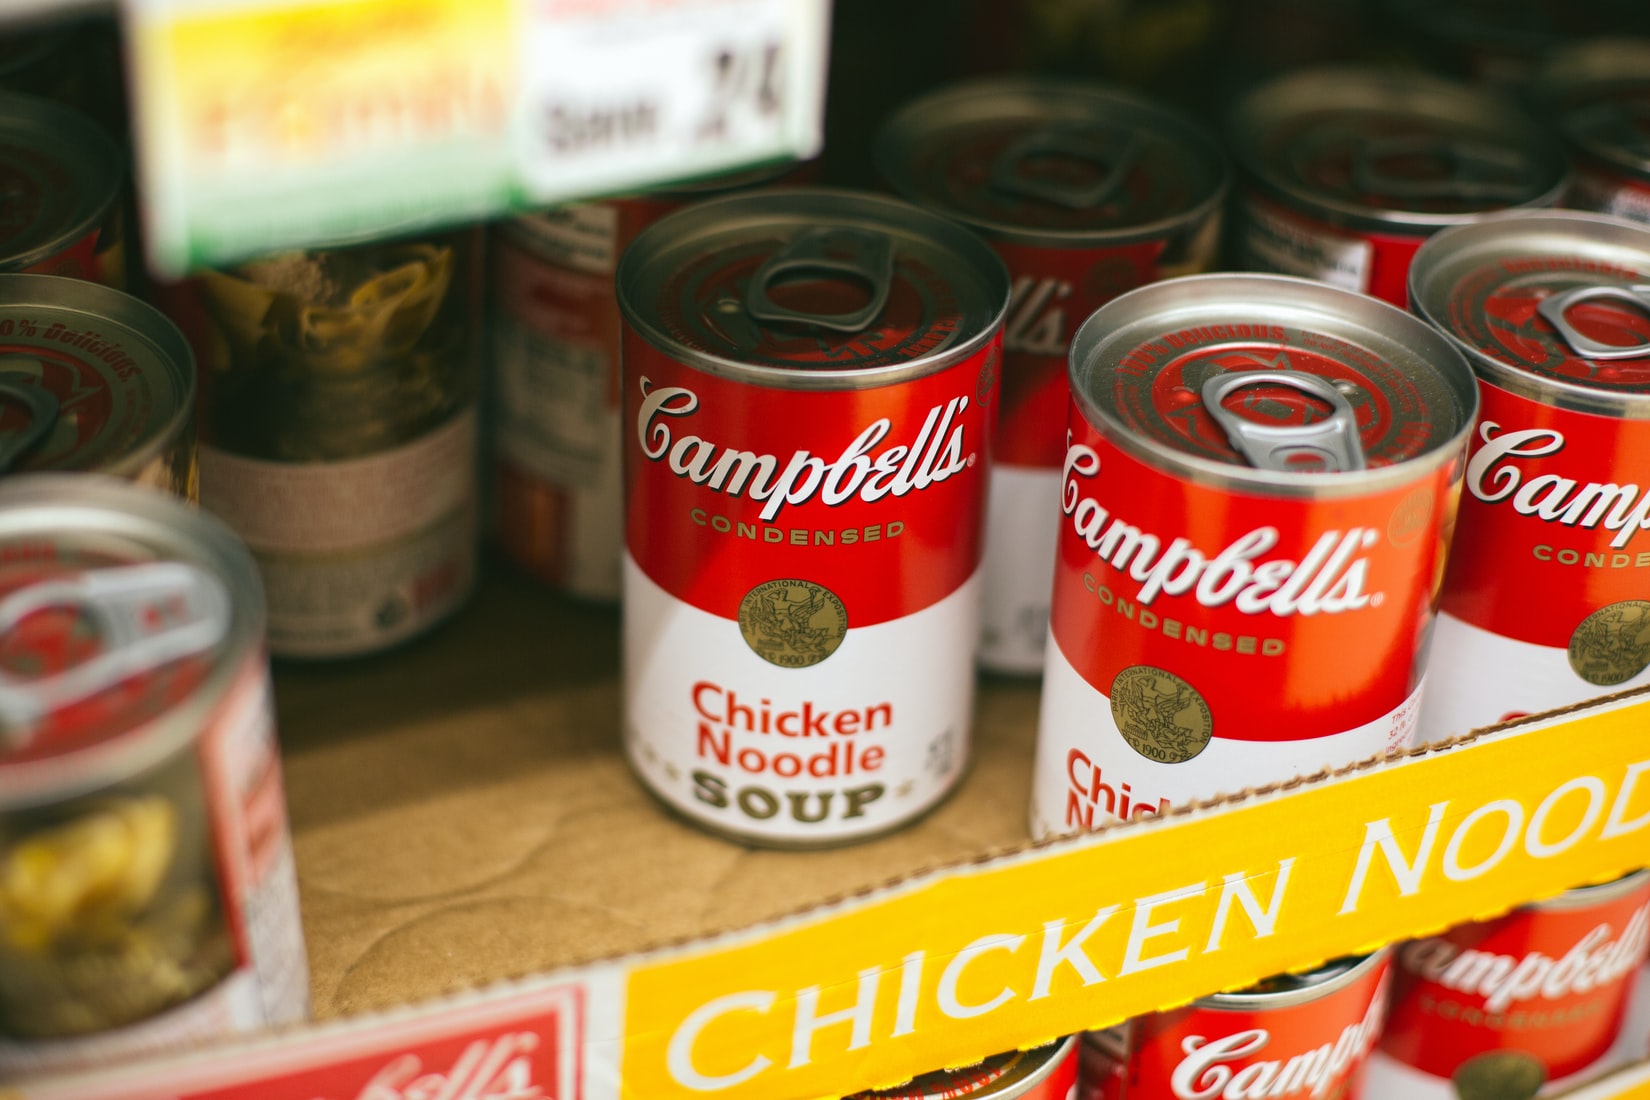 Cans of Campbells Soup in a cardboard box.